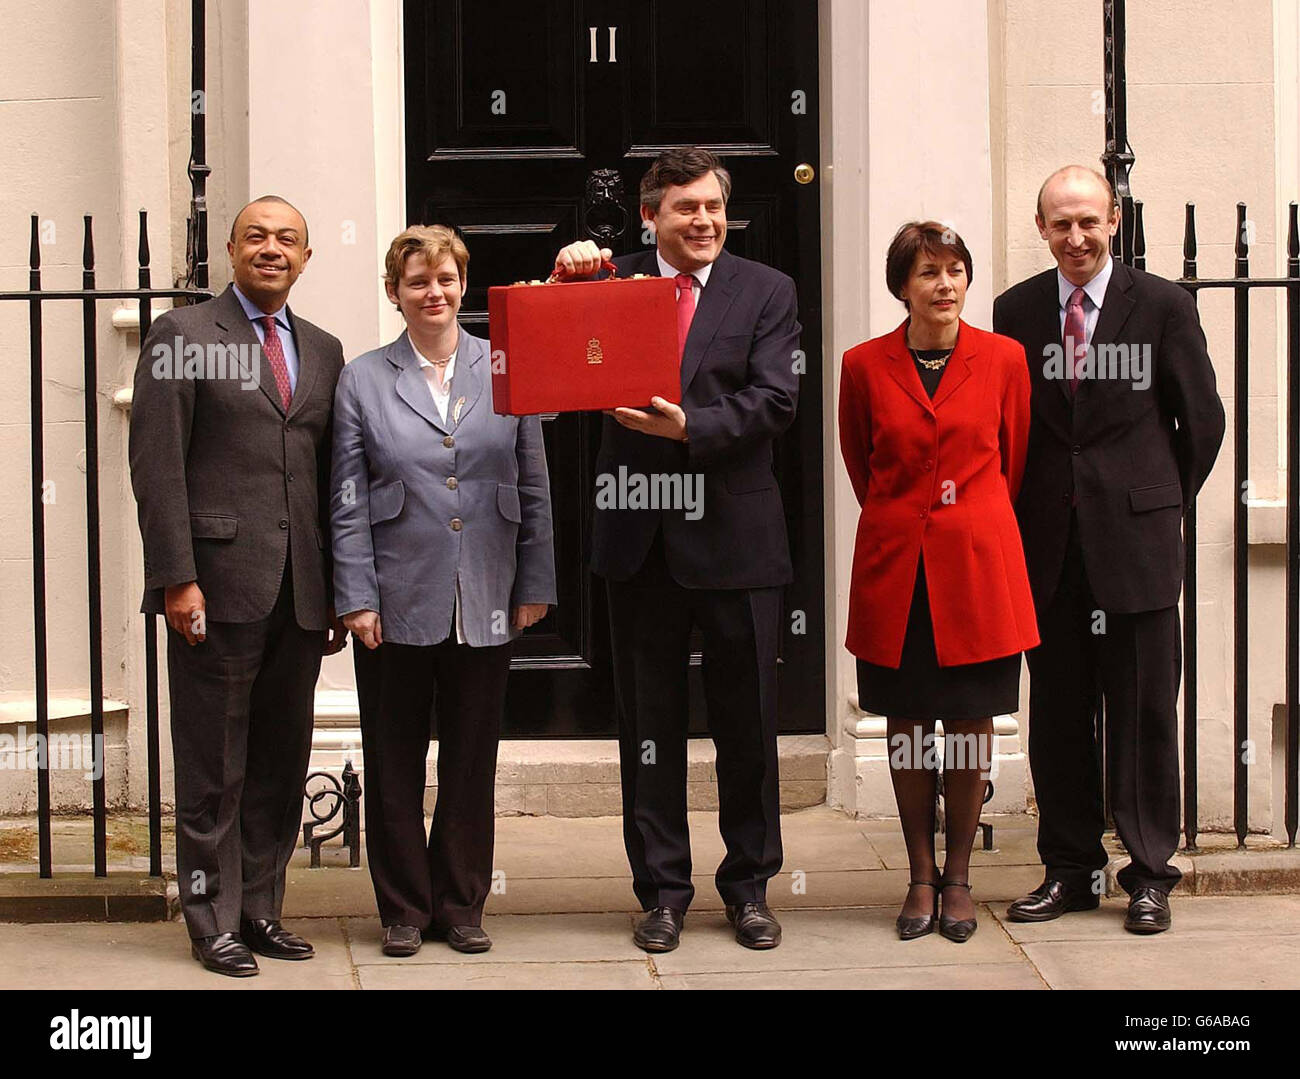 (Left to right) Treasury ministers Paul Boateng, Ruth Kelly, The Chancellor Gordon Brown, Dawn Primarolo and John Healey outside Number 11 Downing Street. Mr Brown was due to present his seventh Budget to the House of Commons, central London. Stock Photo